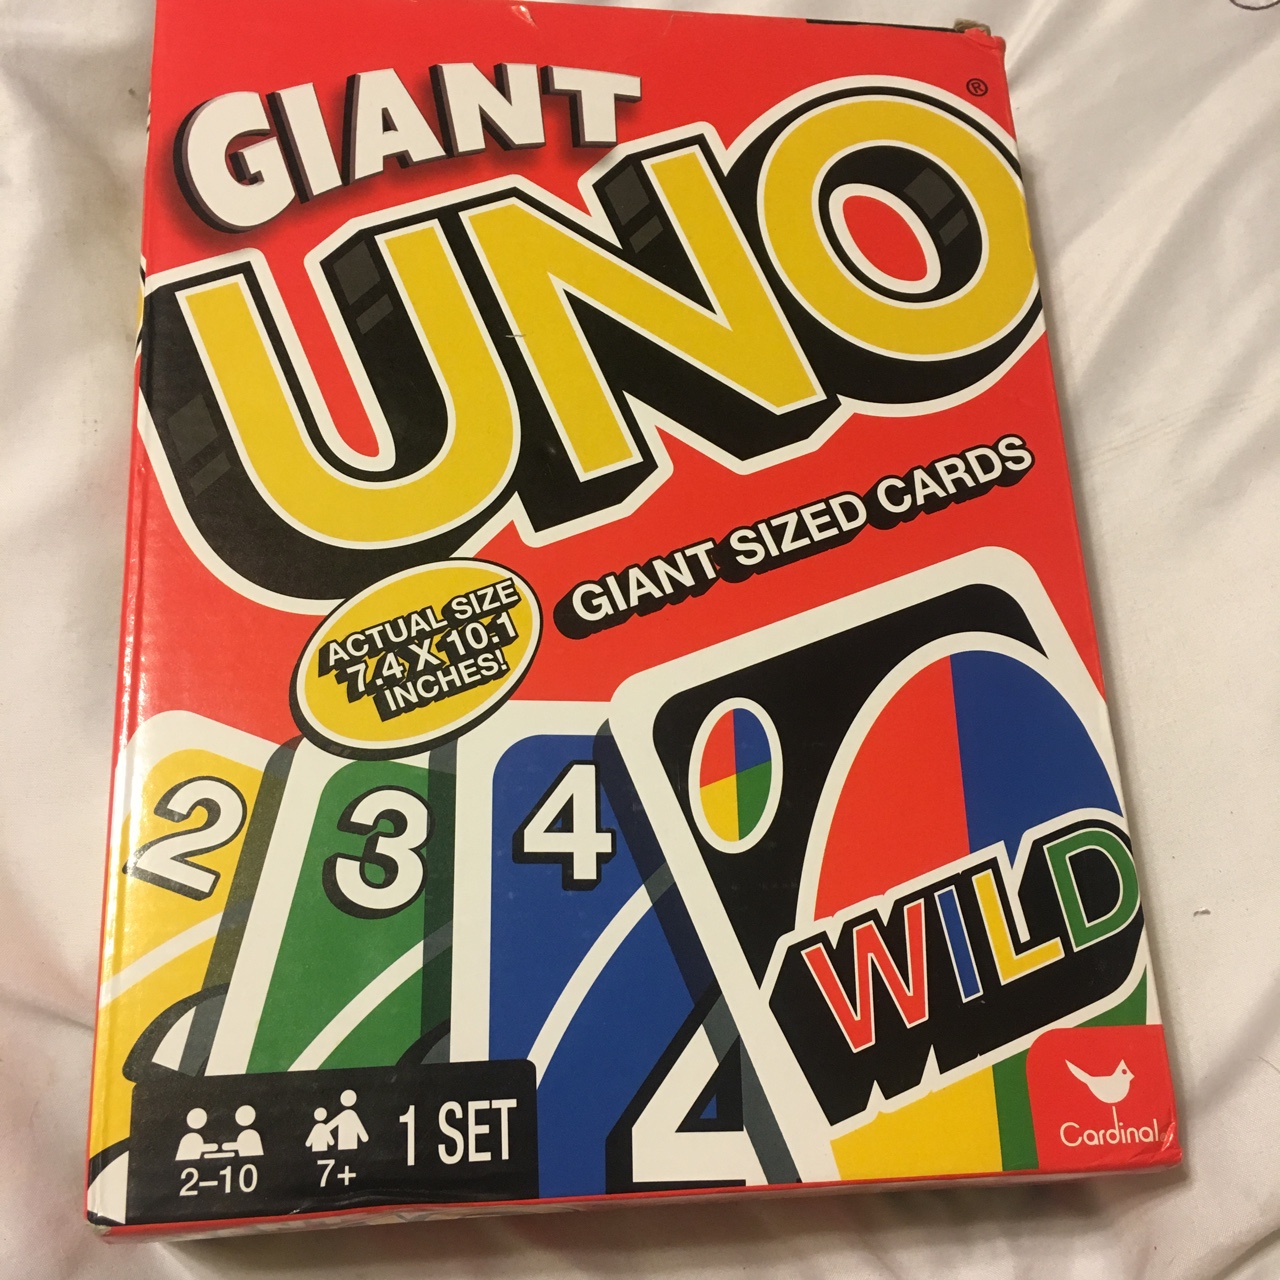 Giant uno cards